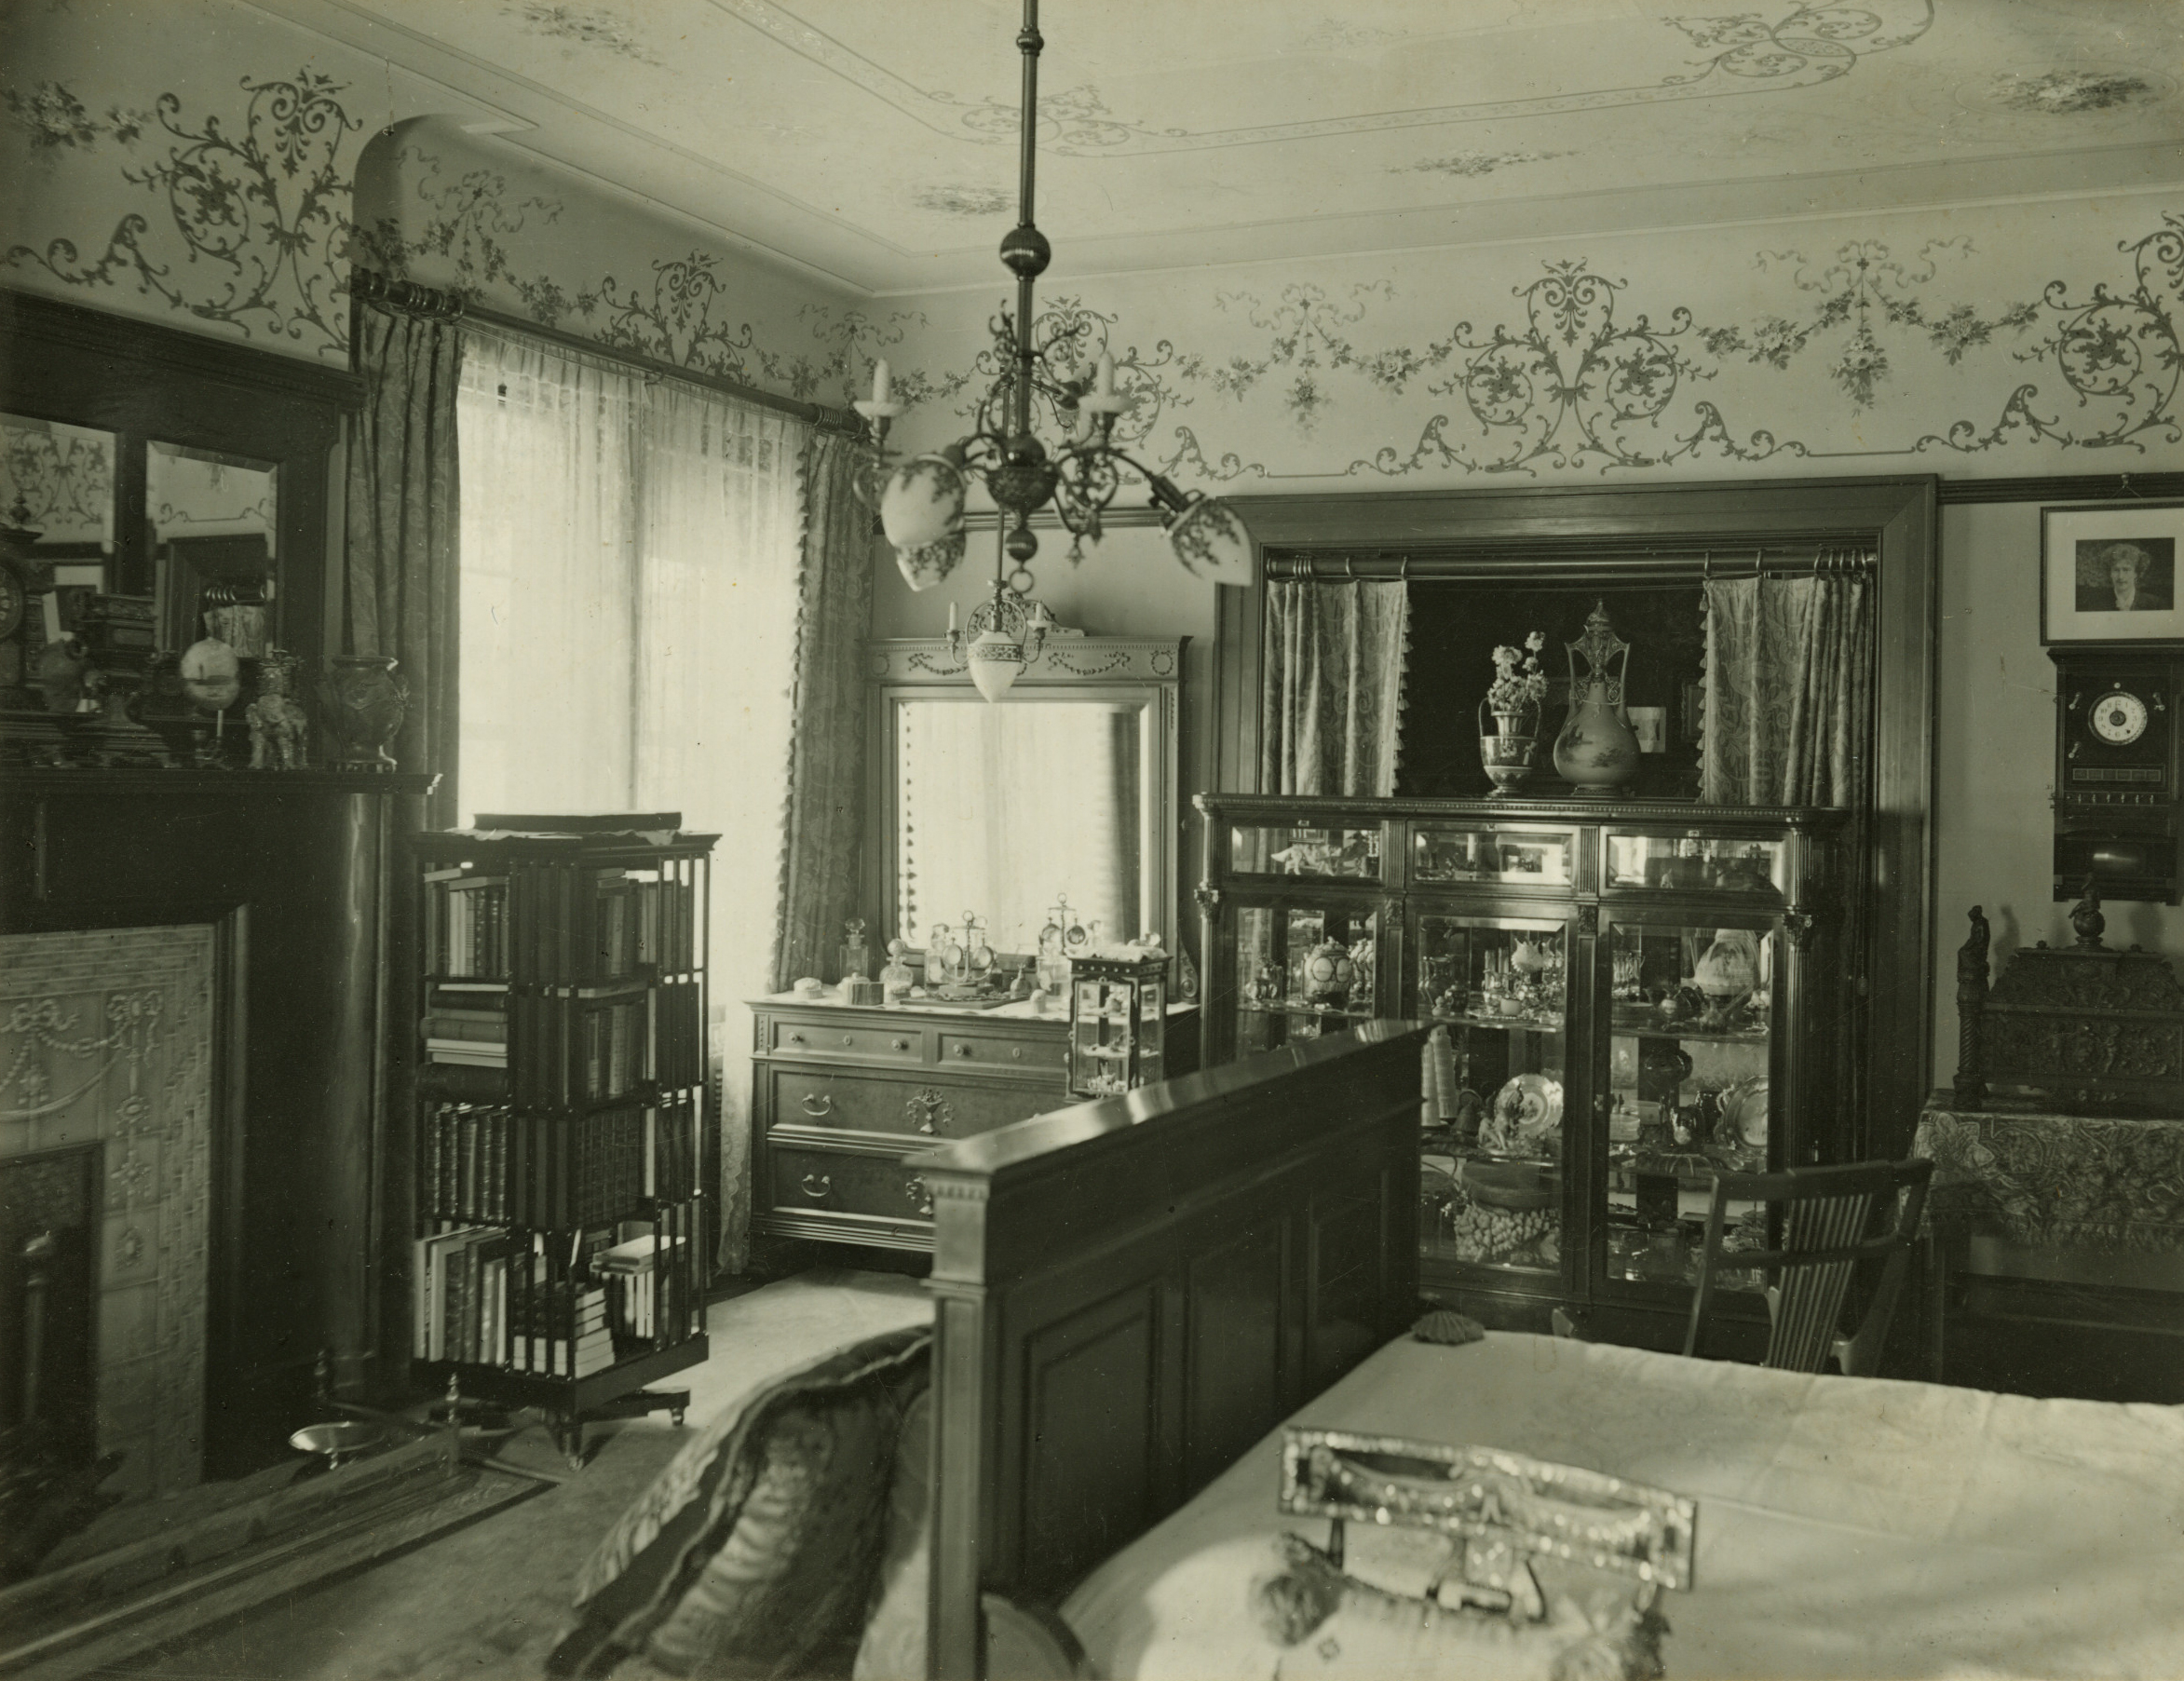 bedroom with view of decorative plasterwork and mantel